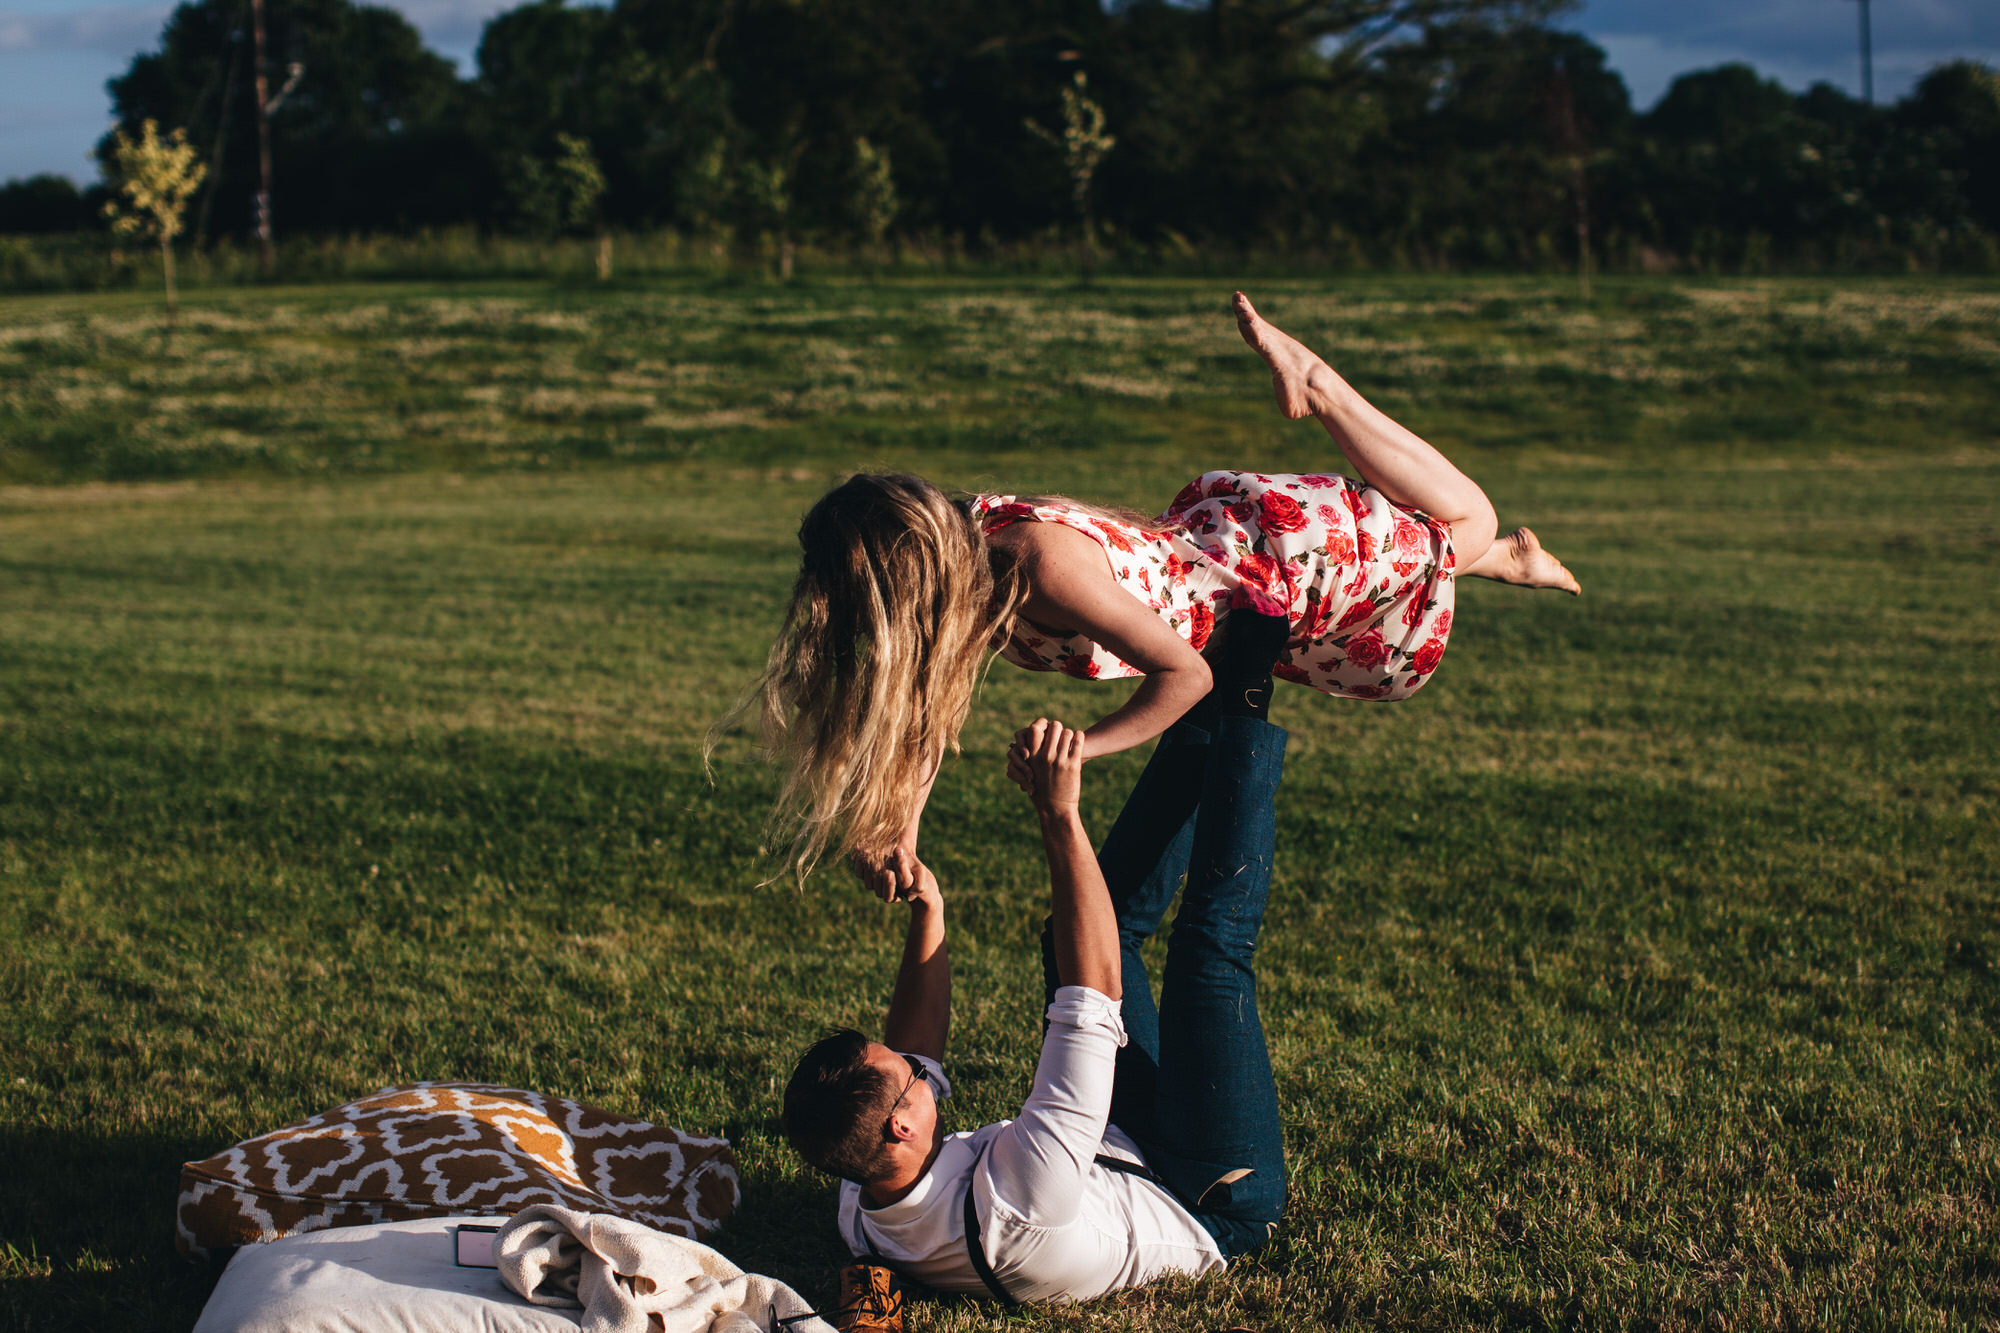 woman is lifted up by man on the grass